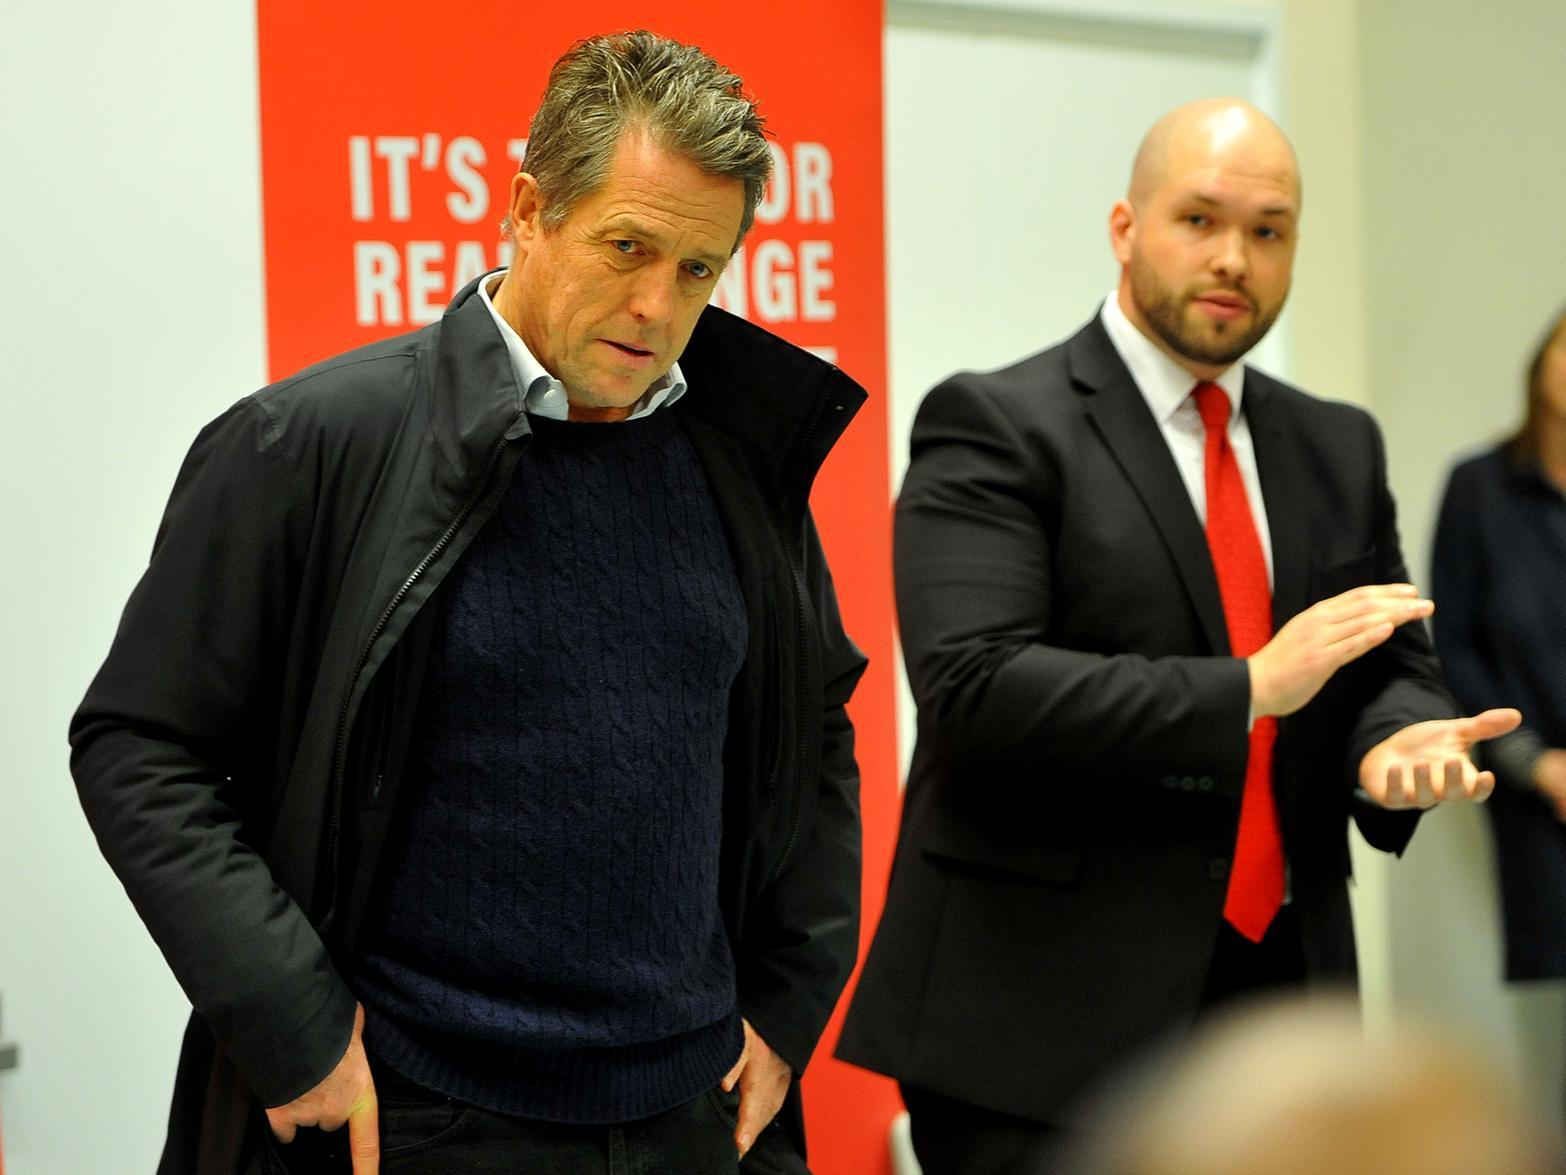 Introduced by Crawley's Labour candidate Peter Lamb (right) Hugh Grant outlined his views ahead of the election, before taking questions from the public and media. Photo: Steve Robards